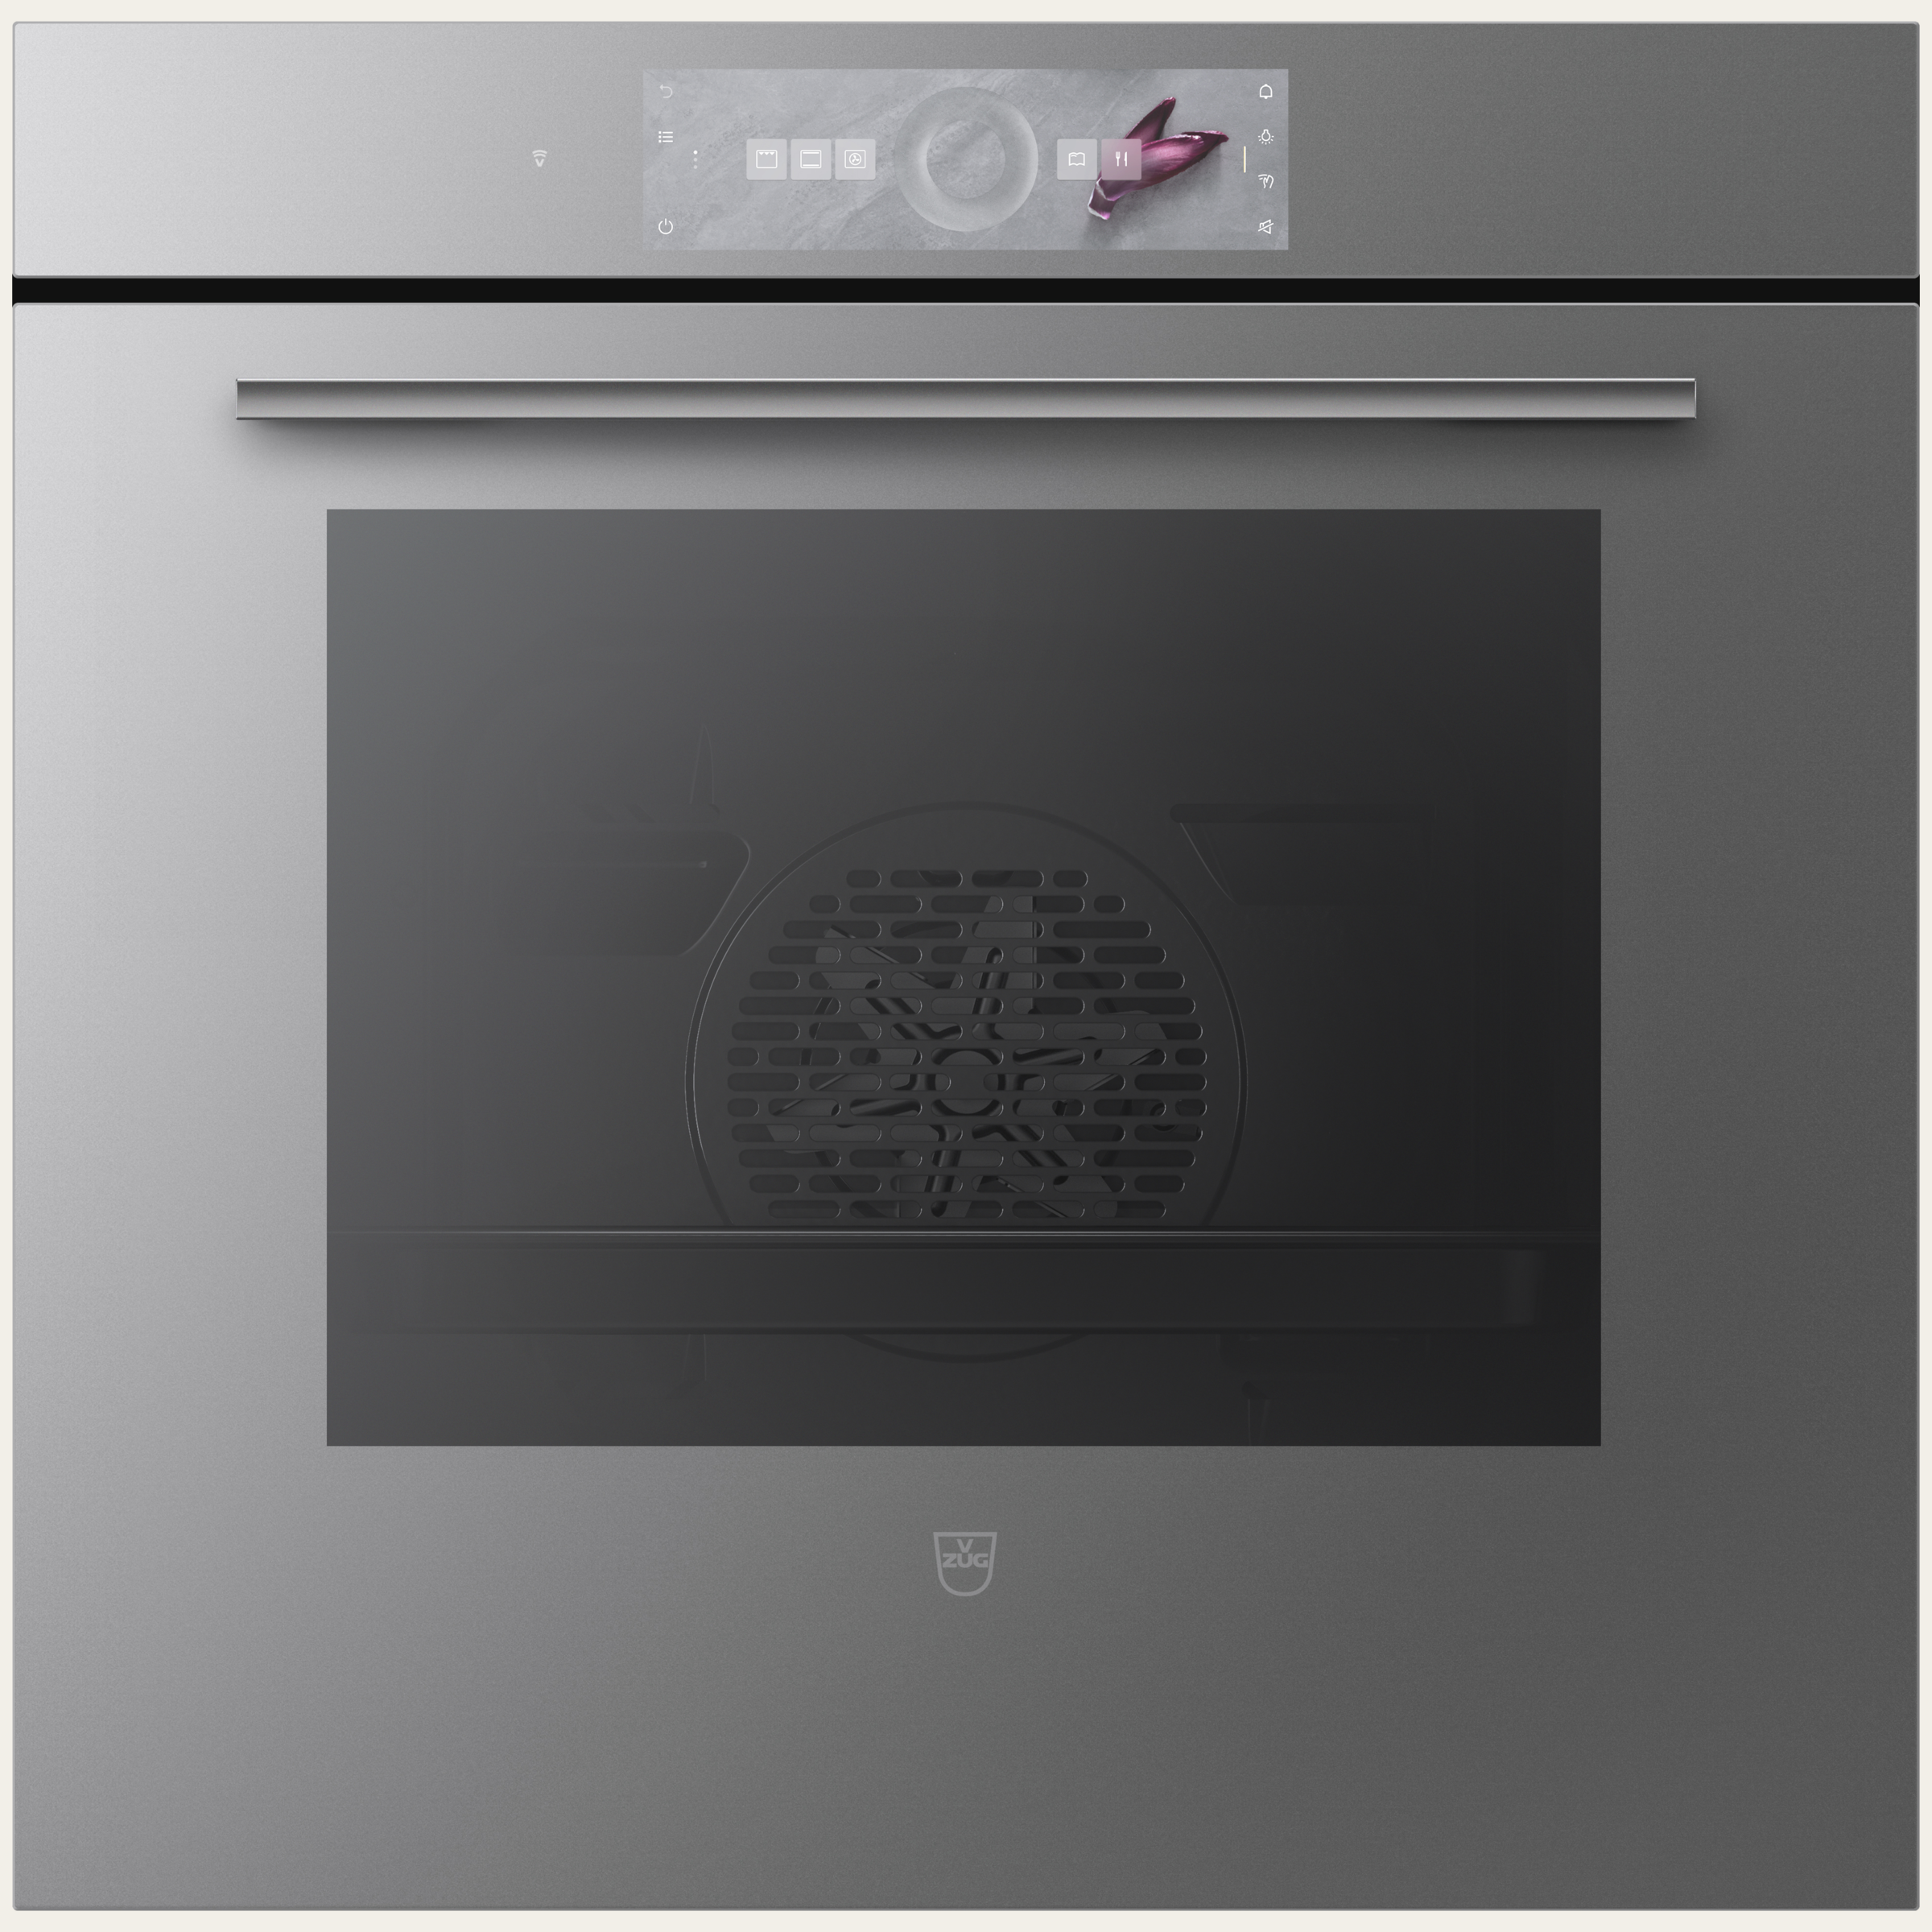 V-ZUG Oven Combair V6000 60P, Standard width: 60 cm,Standard height: 60 cm, Platinum mirror glass, Touchscreen with CircleSlider, V-ZUG-Home, Pyrolytic self-cleaning